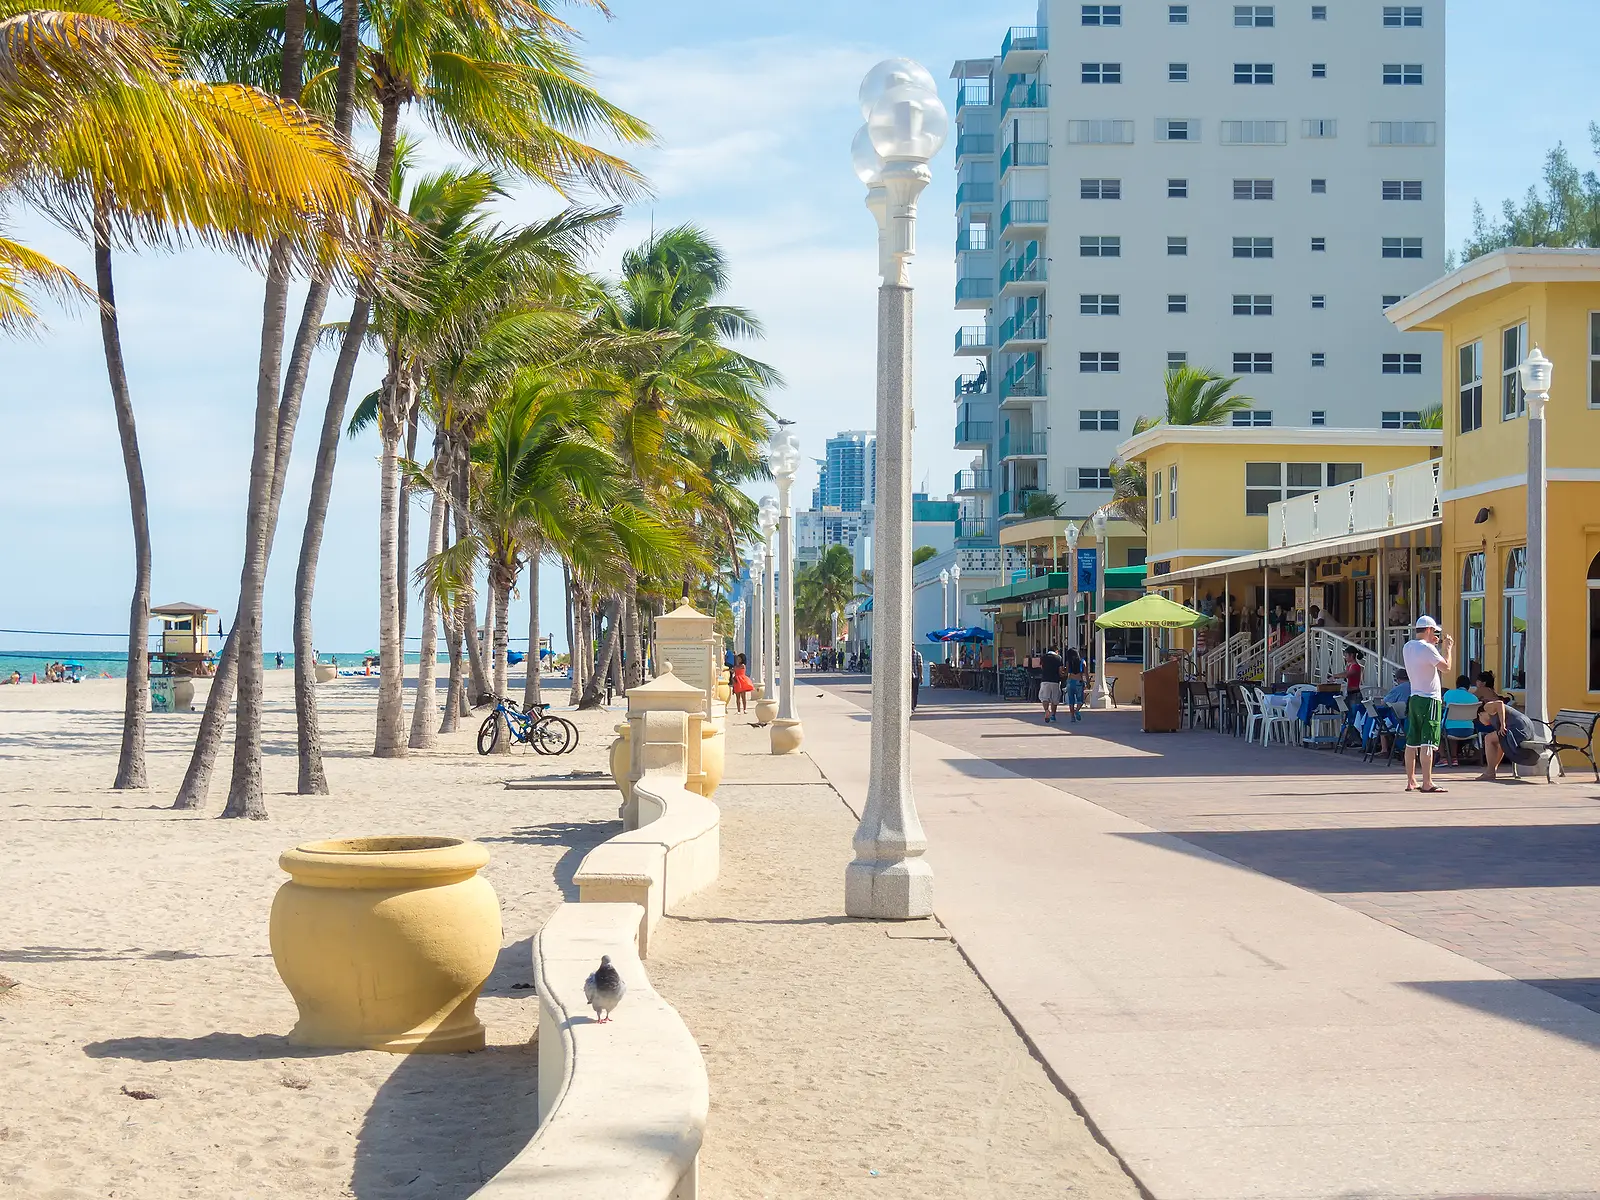  Hotels in Hollywood, Florida